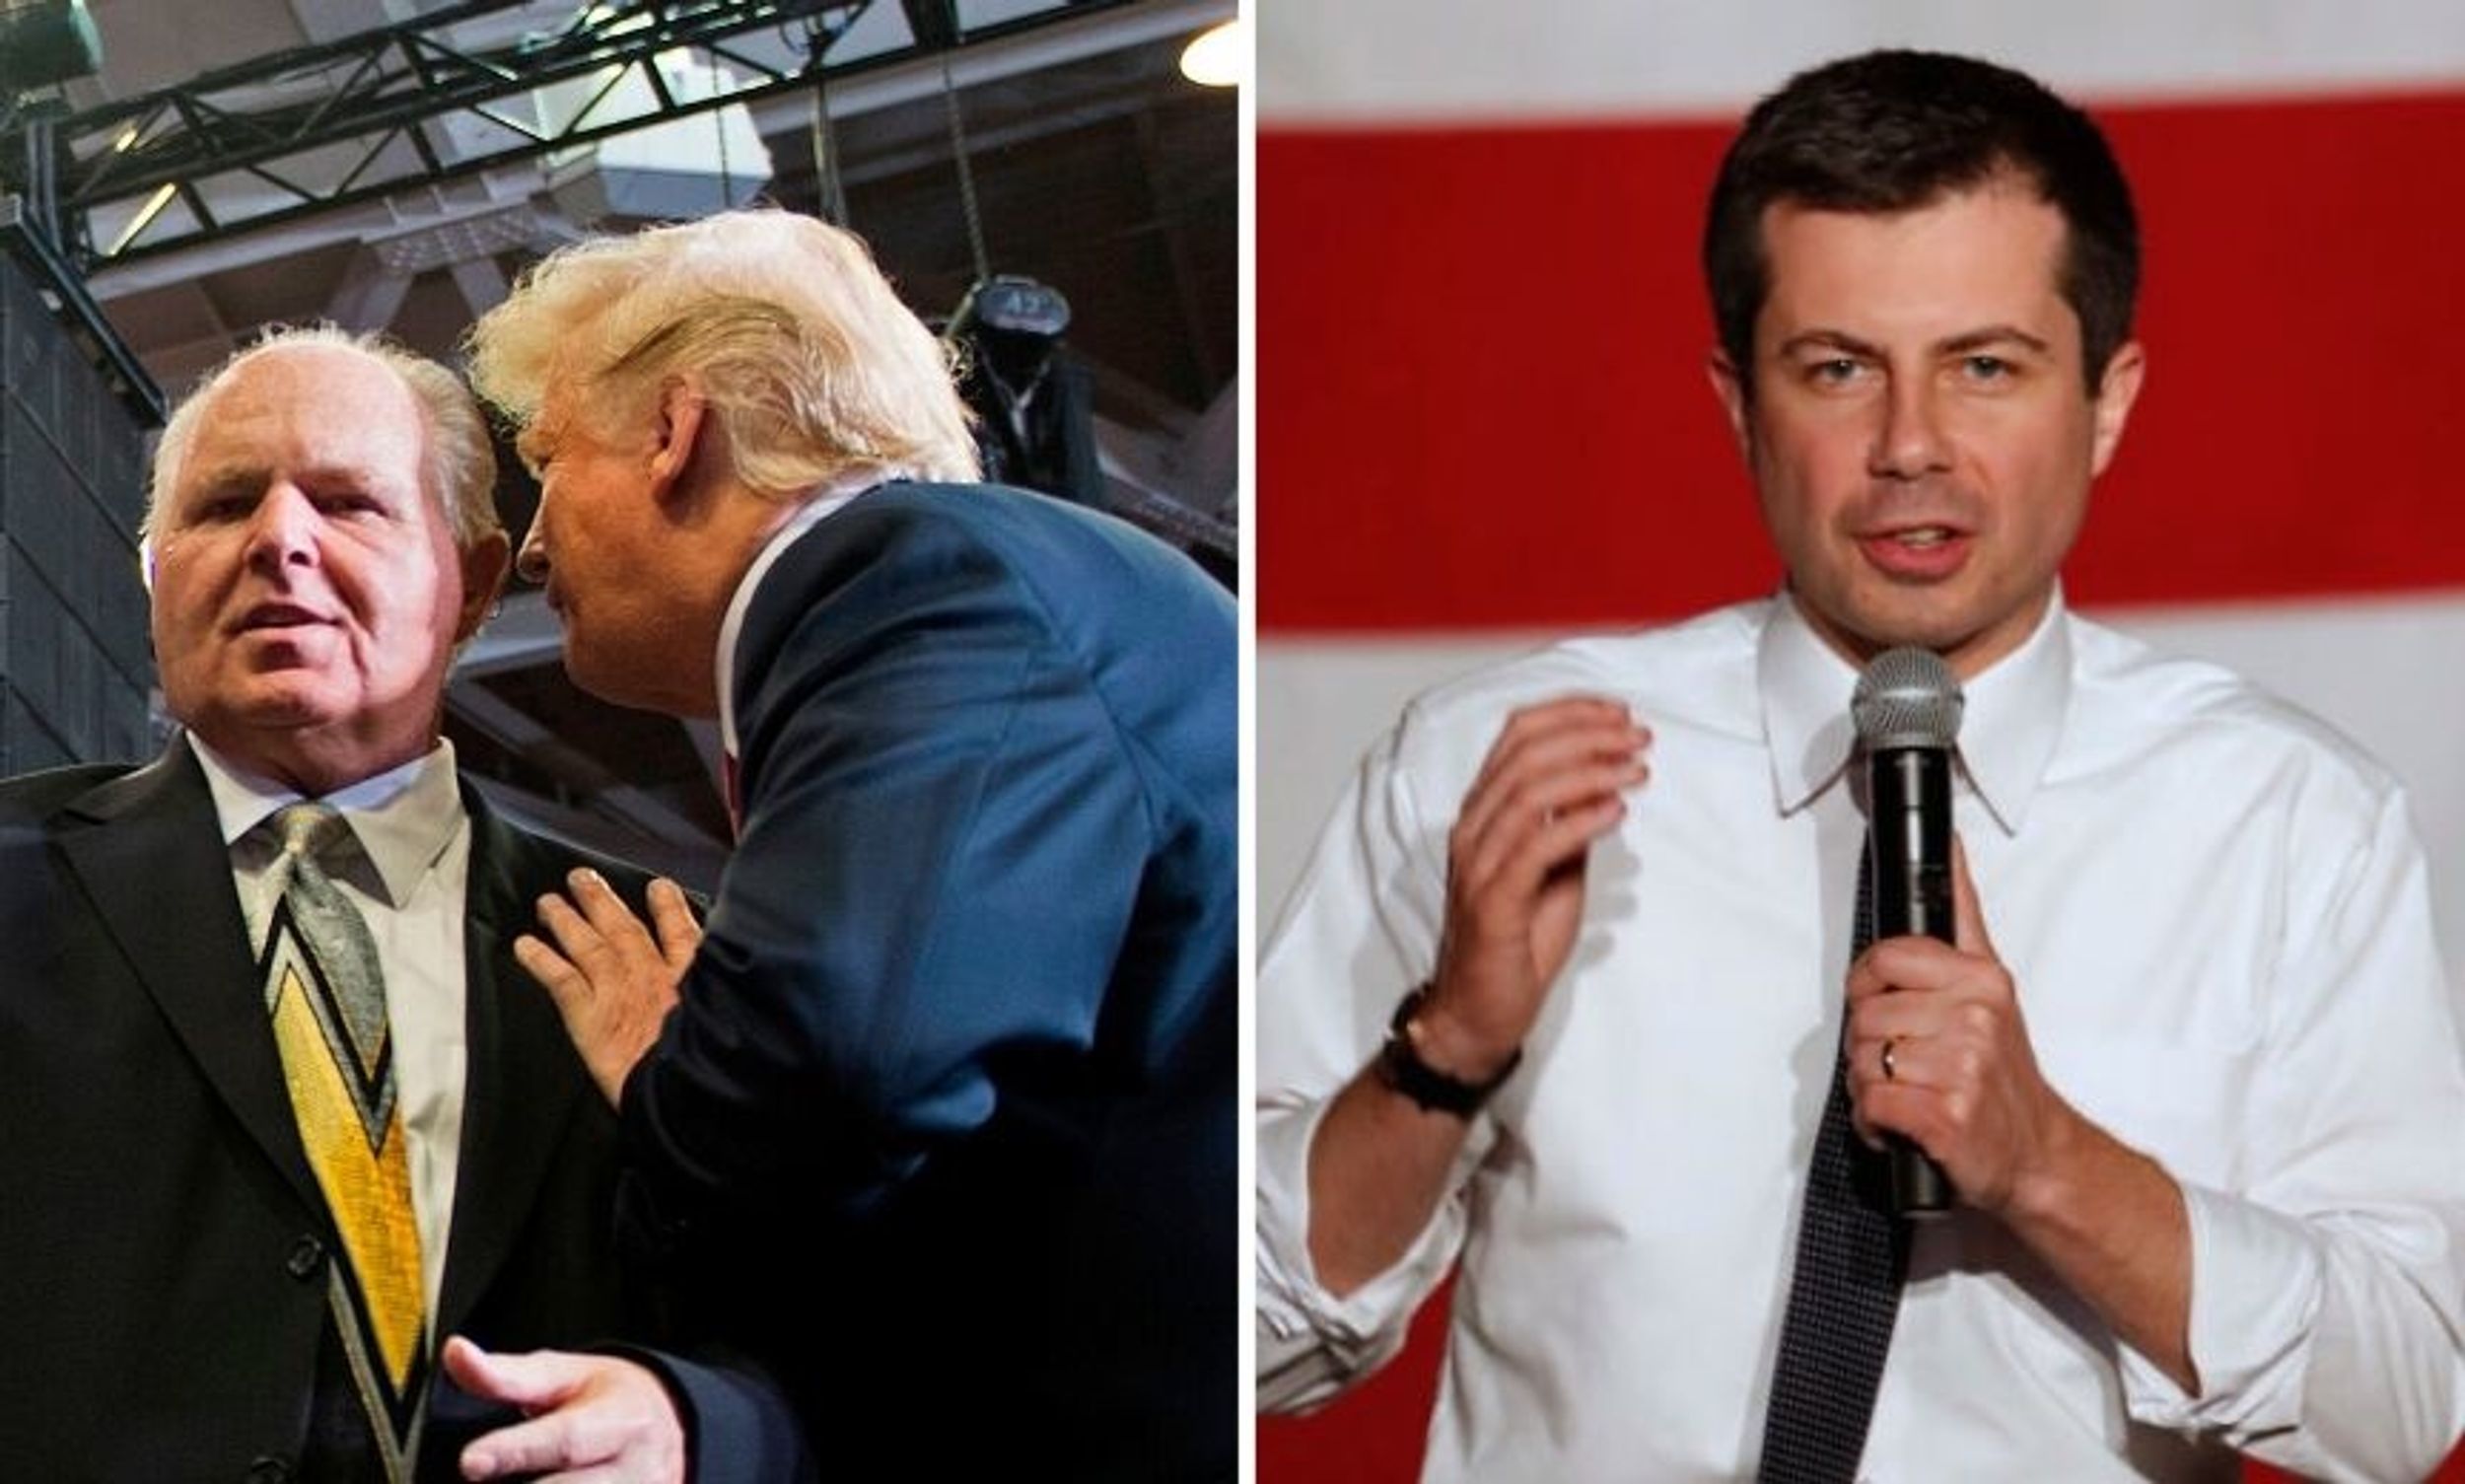 Rush Limbaugh Says Trump Urged Him Not to Apologize for Homophobic Remarks About Buttigieg